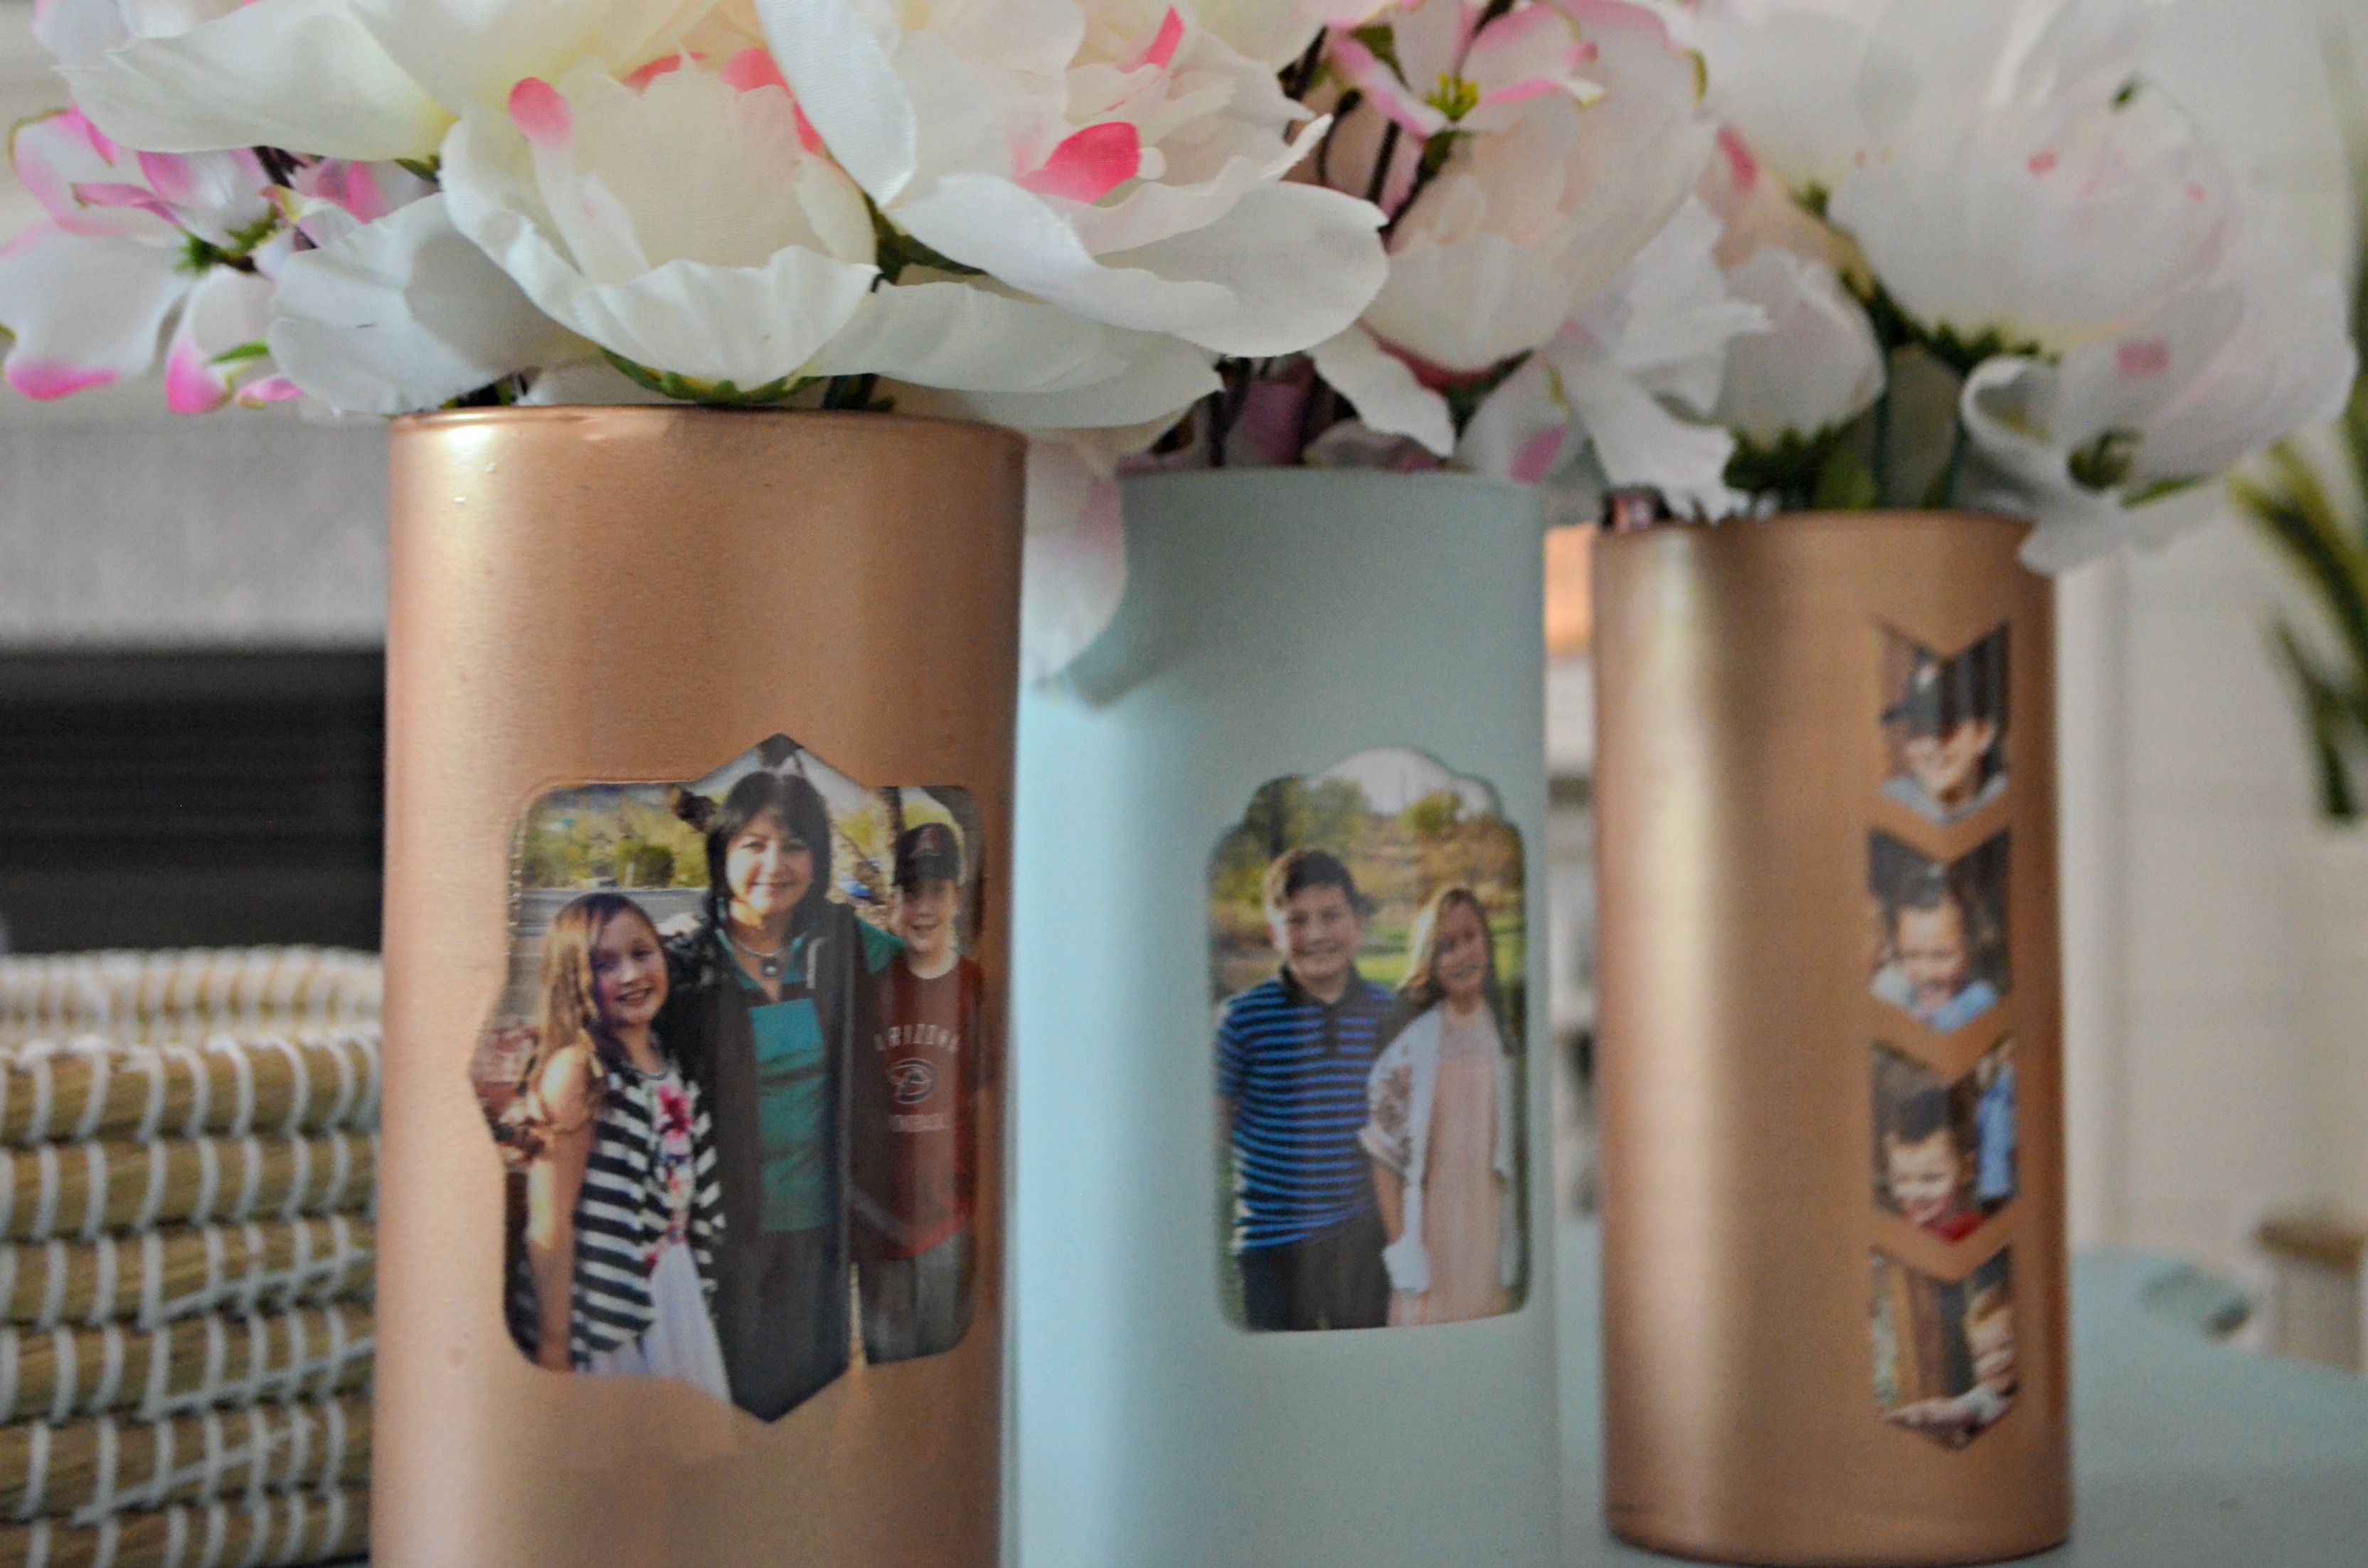 These vases make perfect centerpieces for weddings, graduations, and other festive occasions.